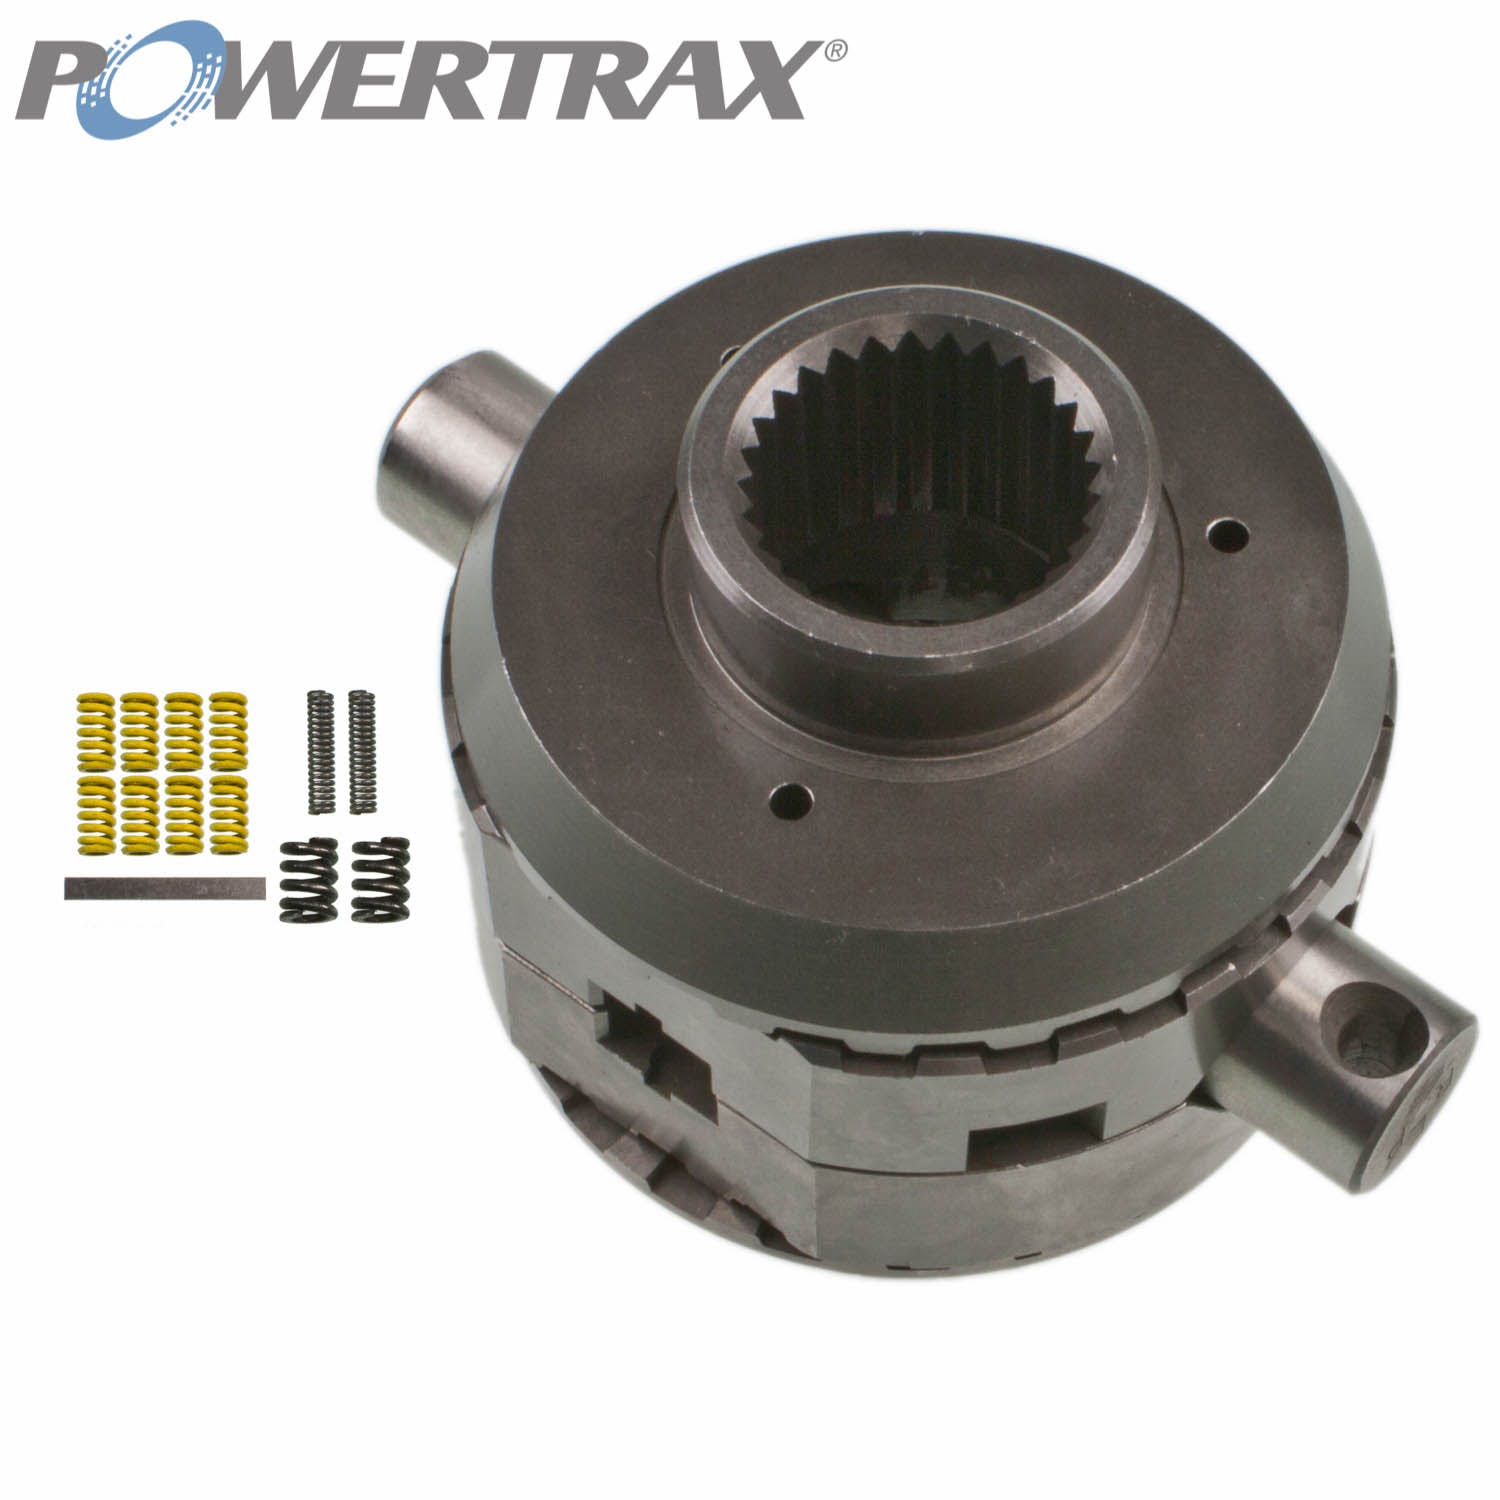 PowerTrax 9207822801 No-Slip Traction System